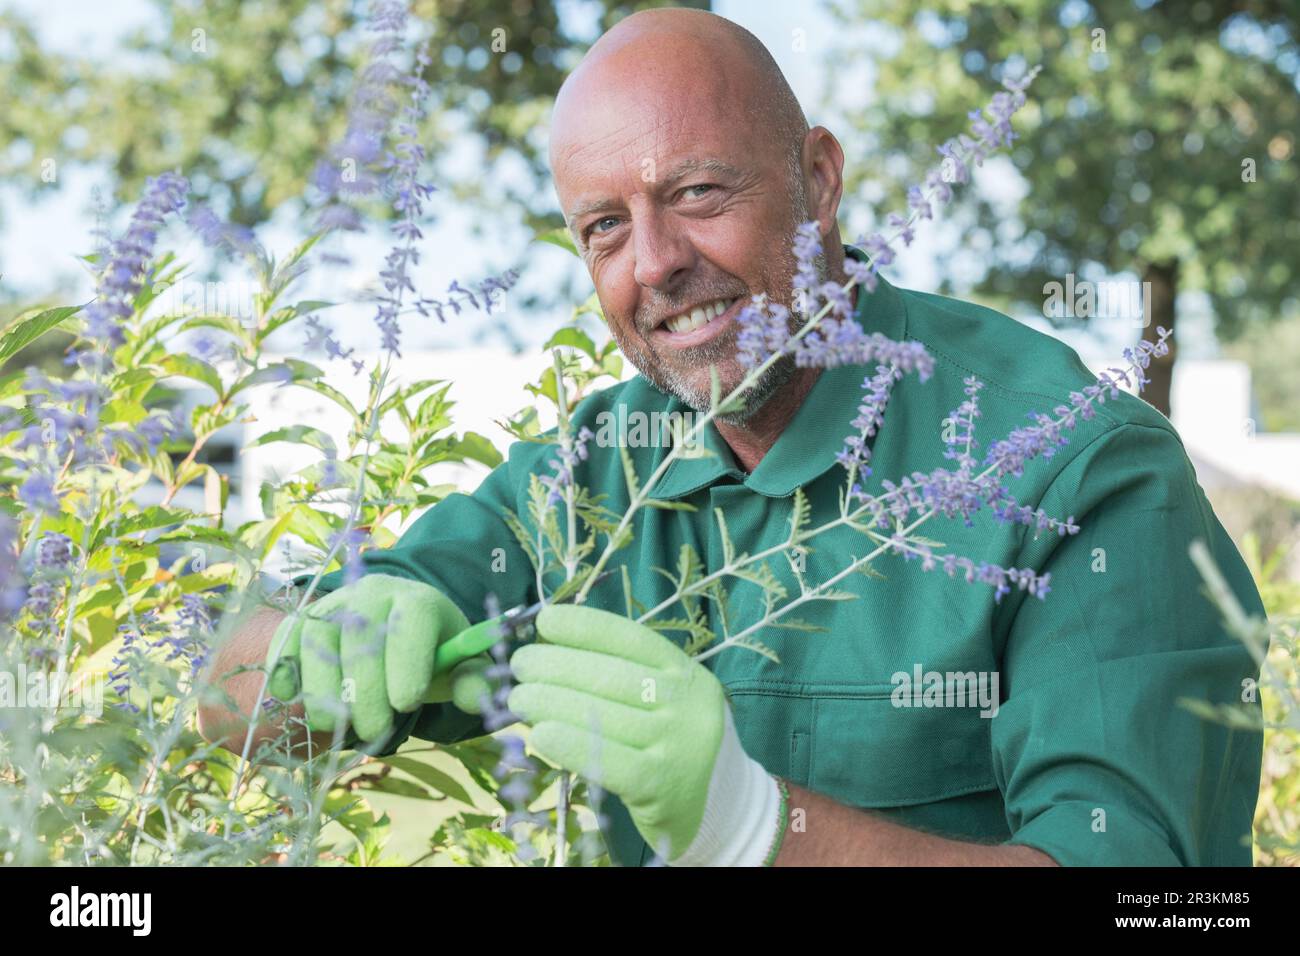 a male gardener working outdoors Stock Photo